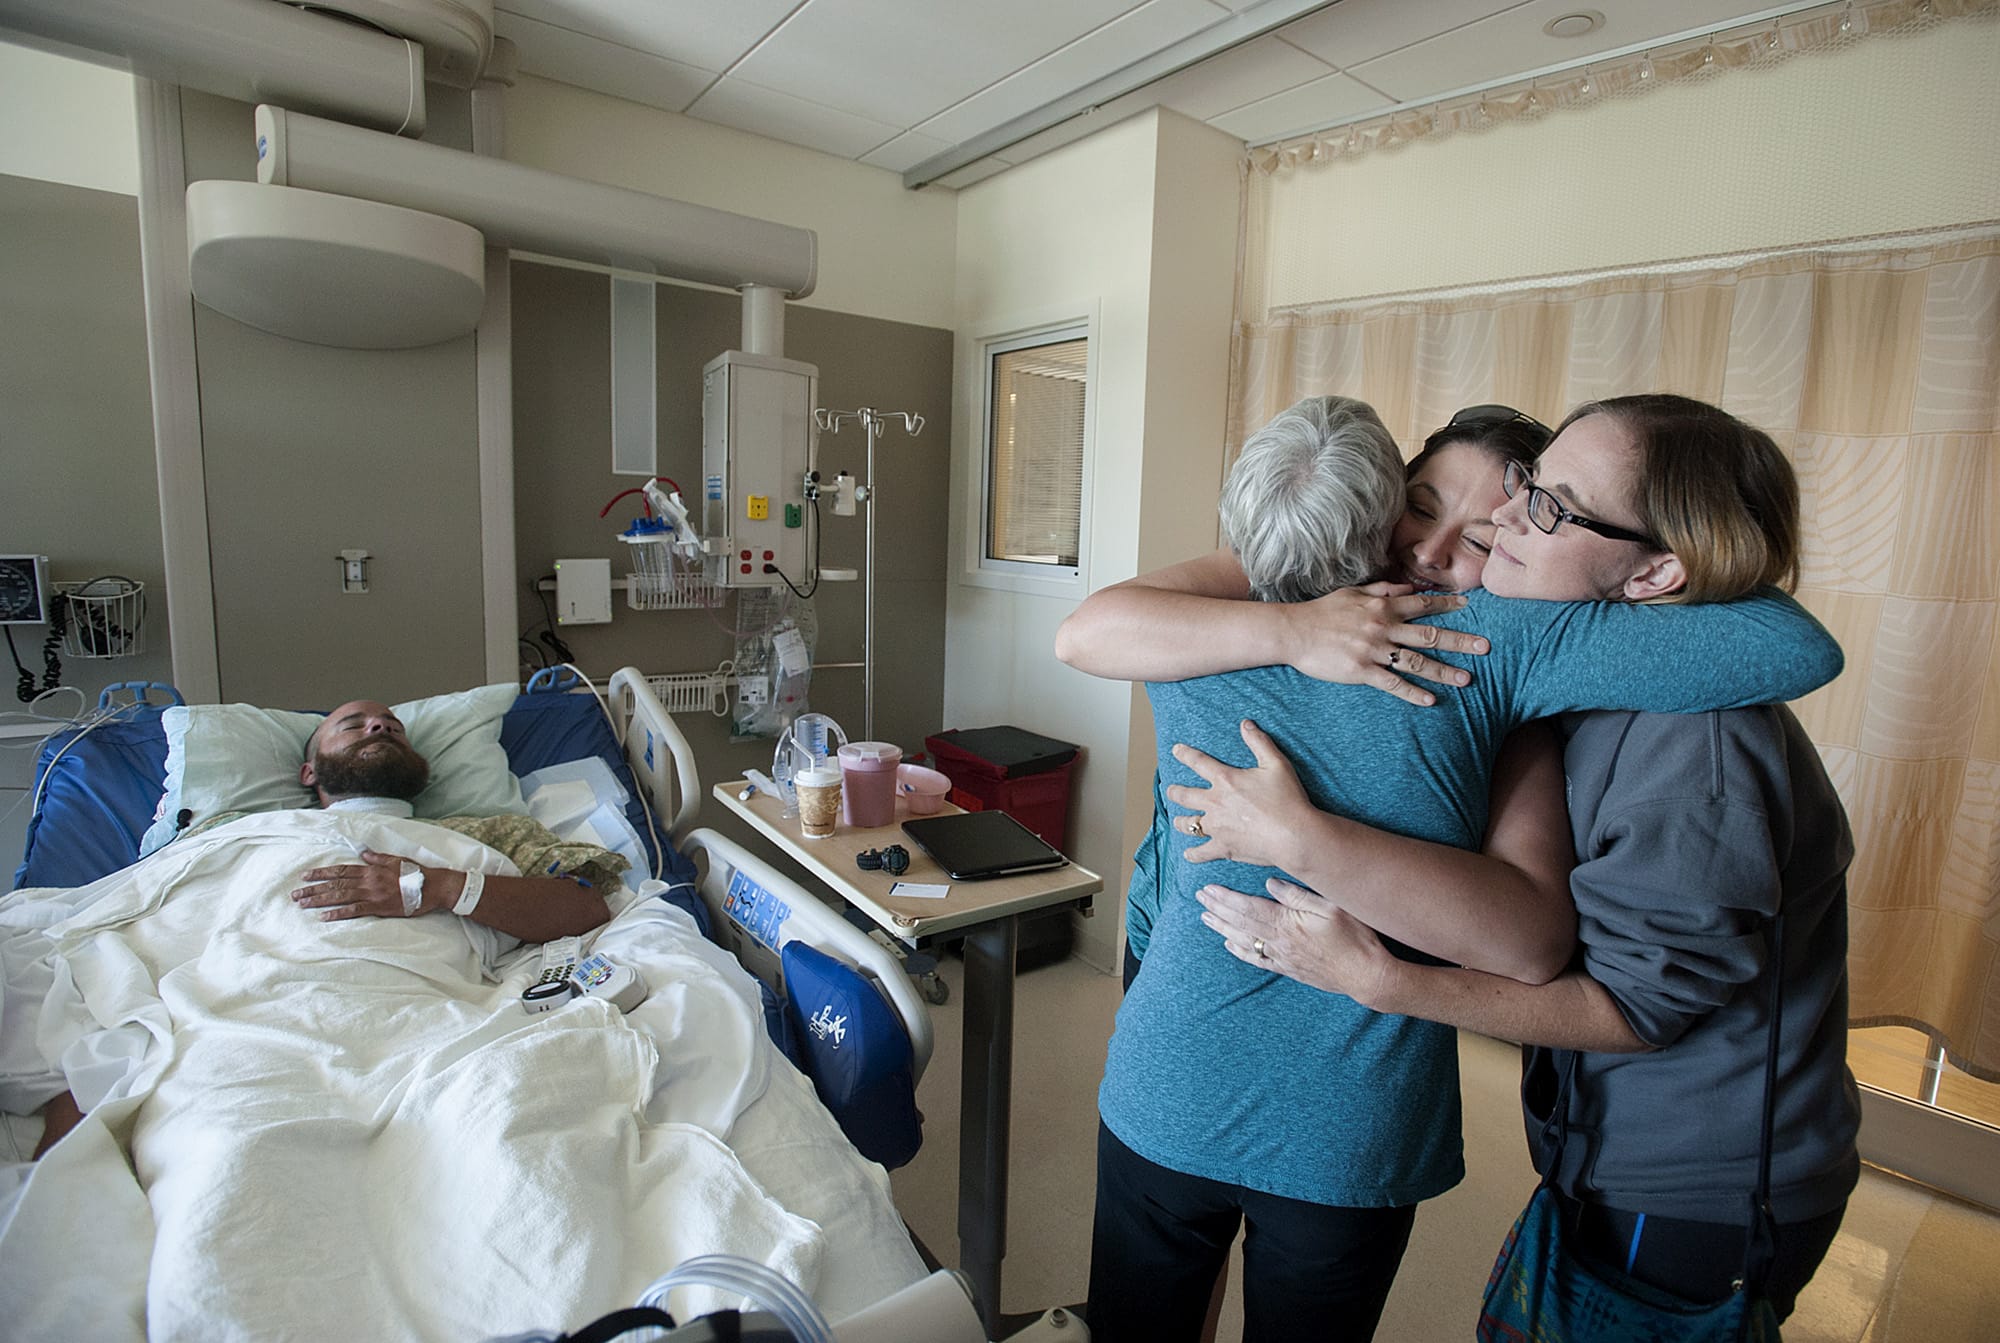 Scott Jensen of Amboy, from left, rests in his hospital bed as his mom, Therese Jensen, thanks the women who helped save his life, Hiedi Poulson of Brush Prairie and Kim Detter of Battle Ground, Wednesday morning, July 6, 2016 at PeaceHealth Southwest Medical Center.